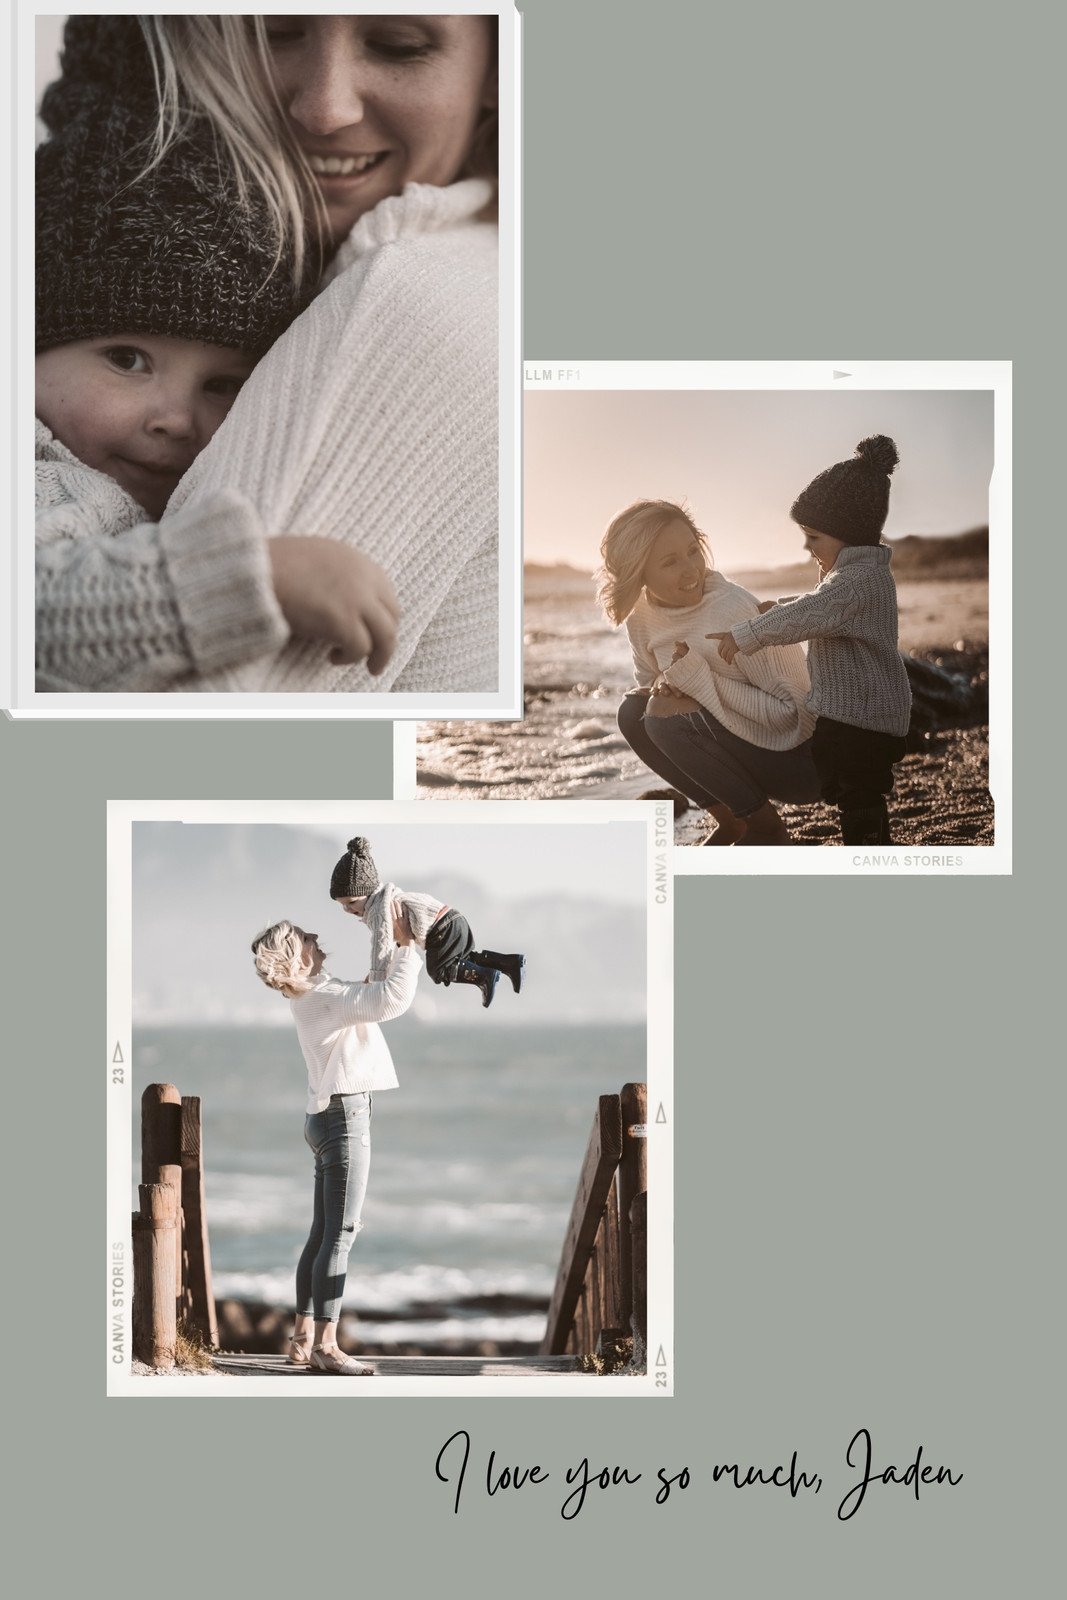 Free and customizable baby photo collage templates